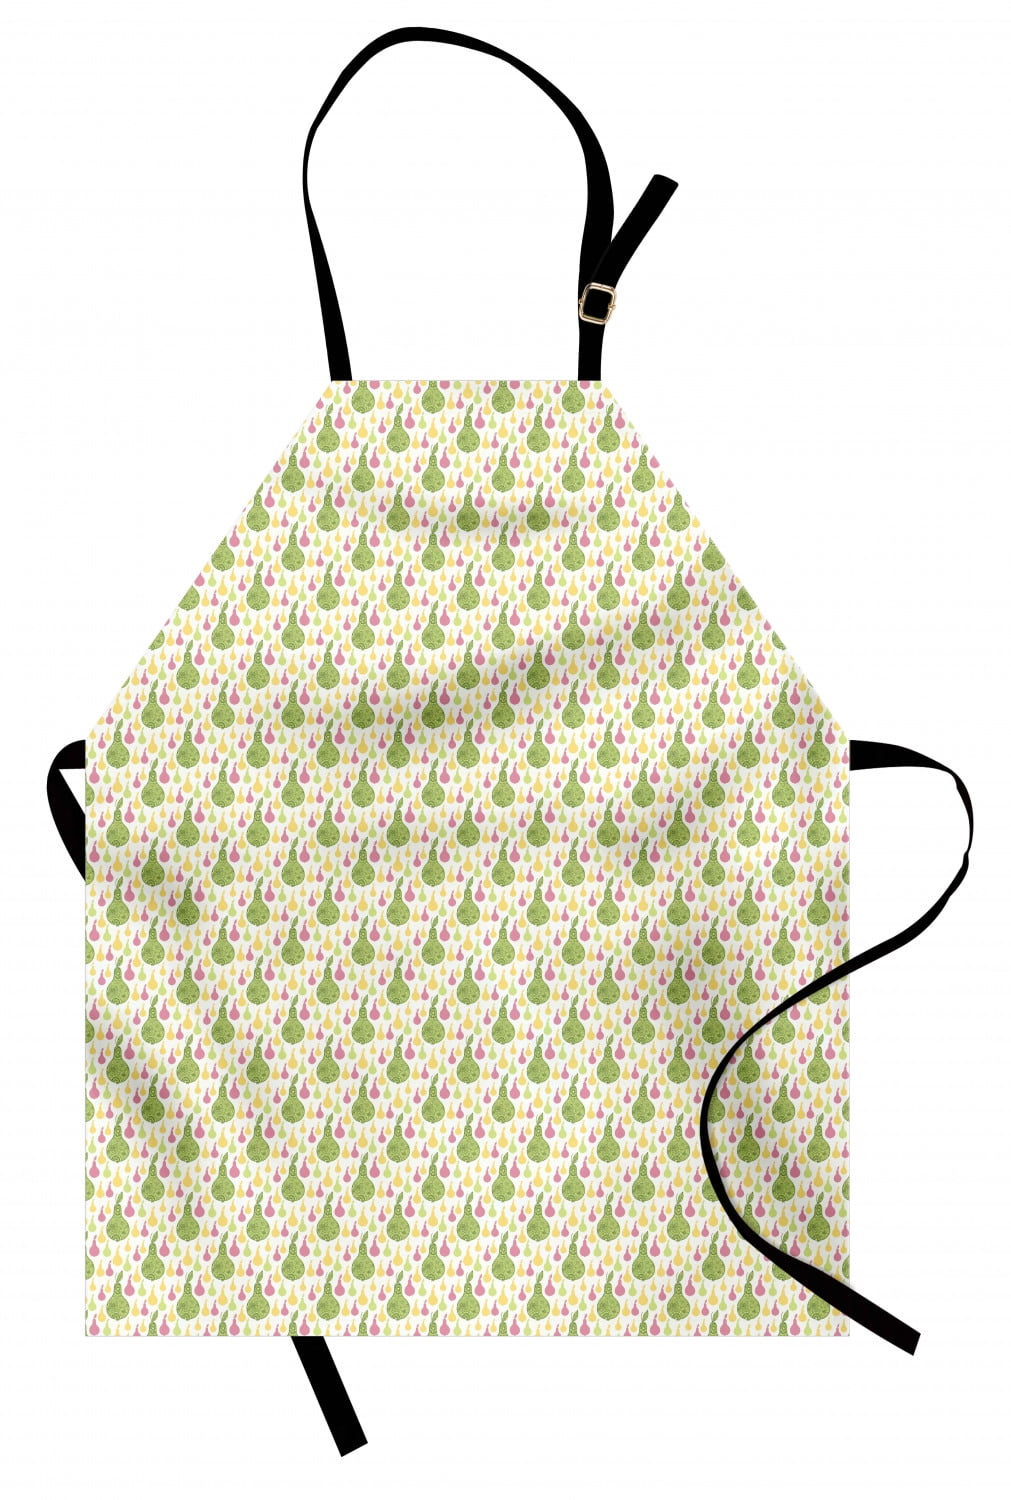 Details about   Indoor Use Apron with Adjustable Neck Strap for Gardening and Cooking Ambesonne 